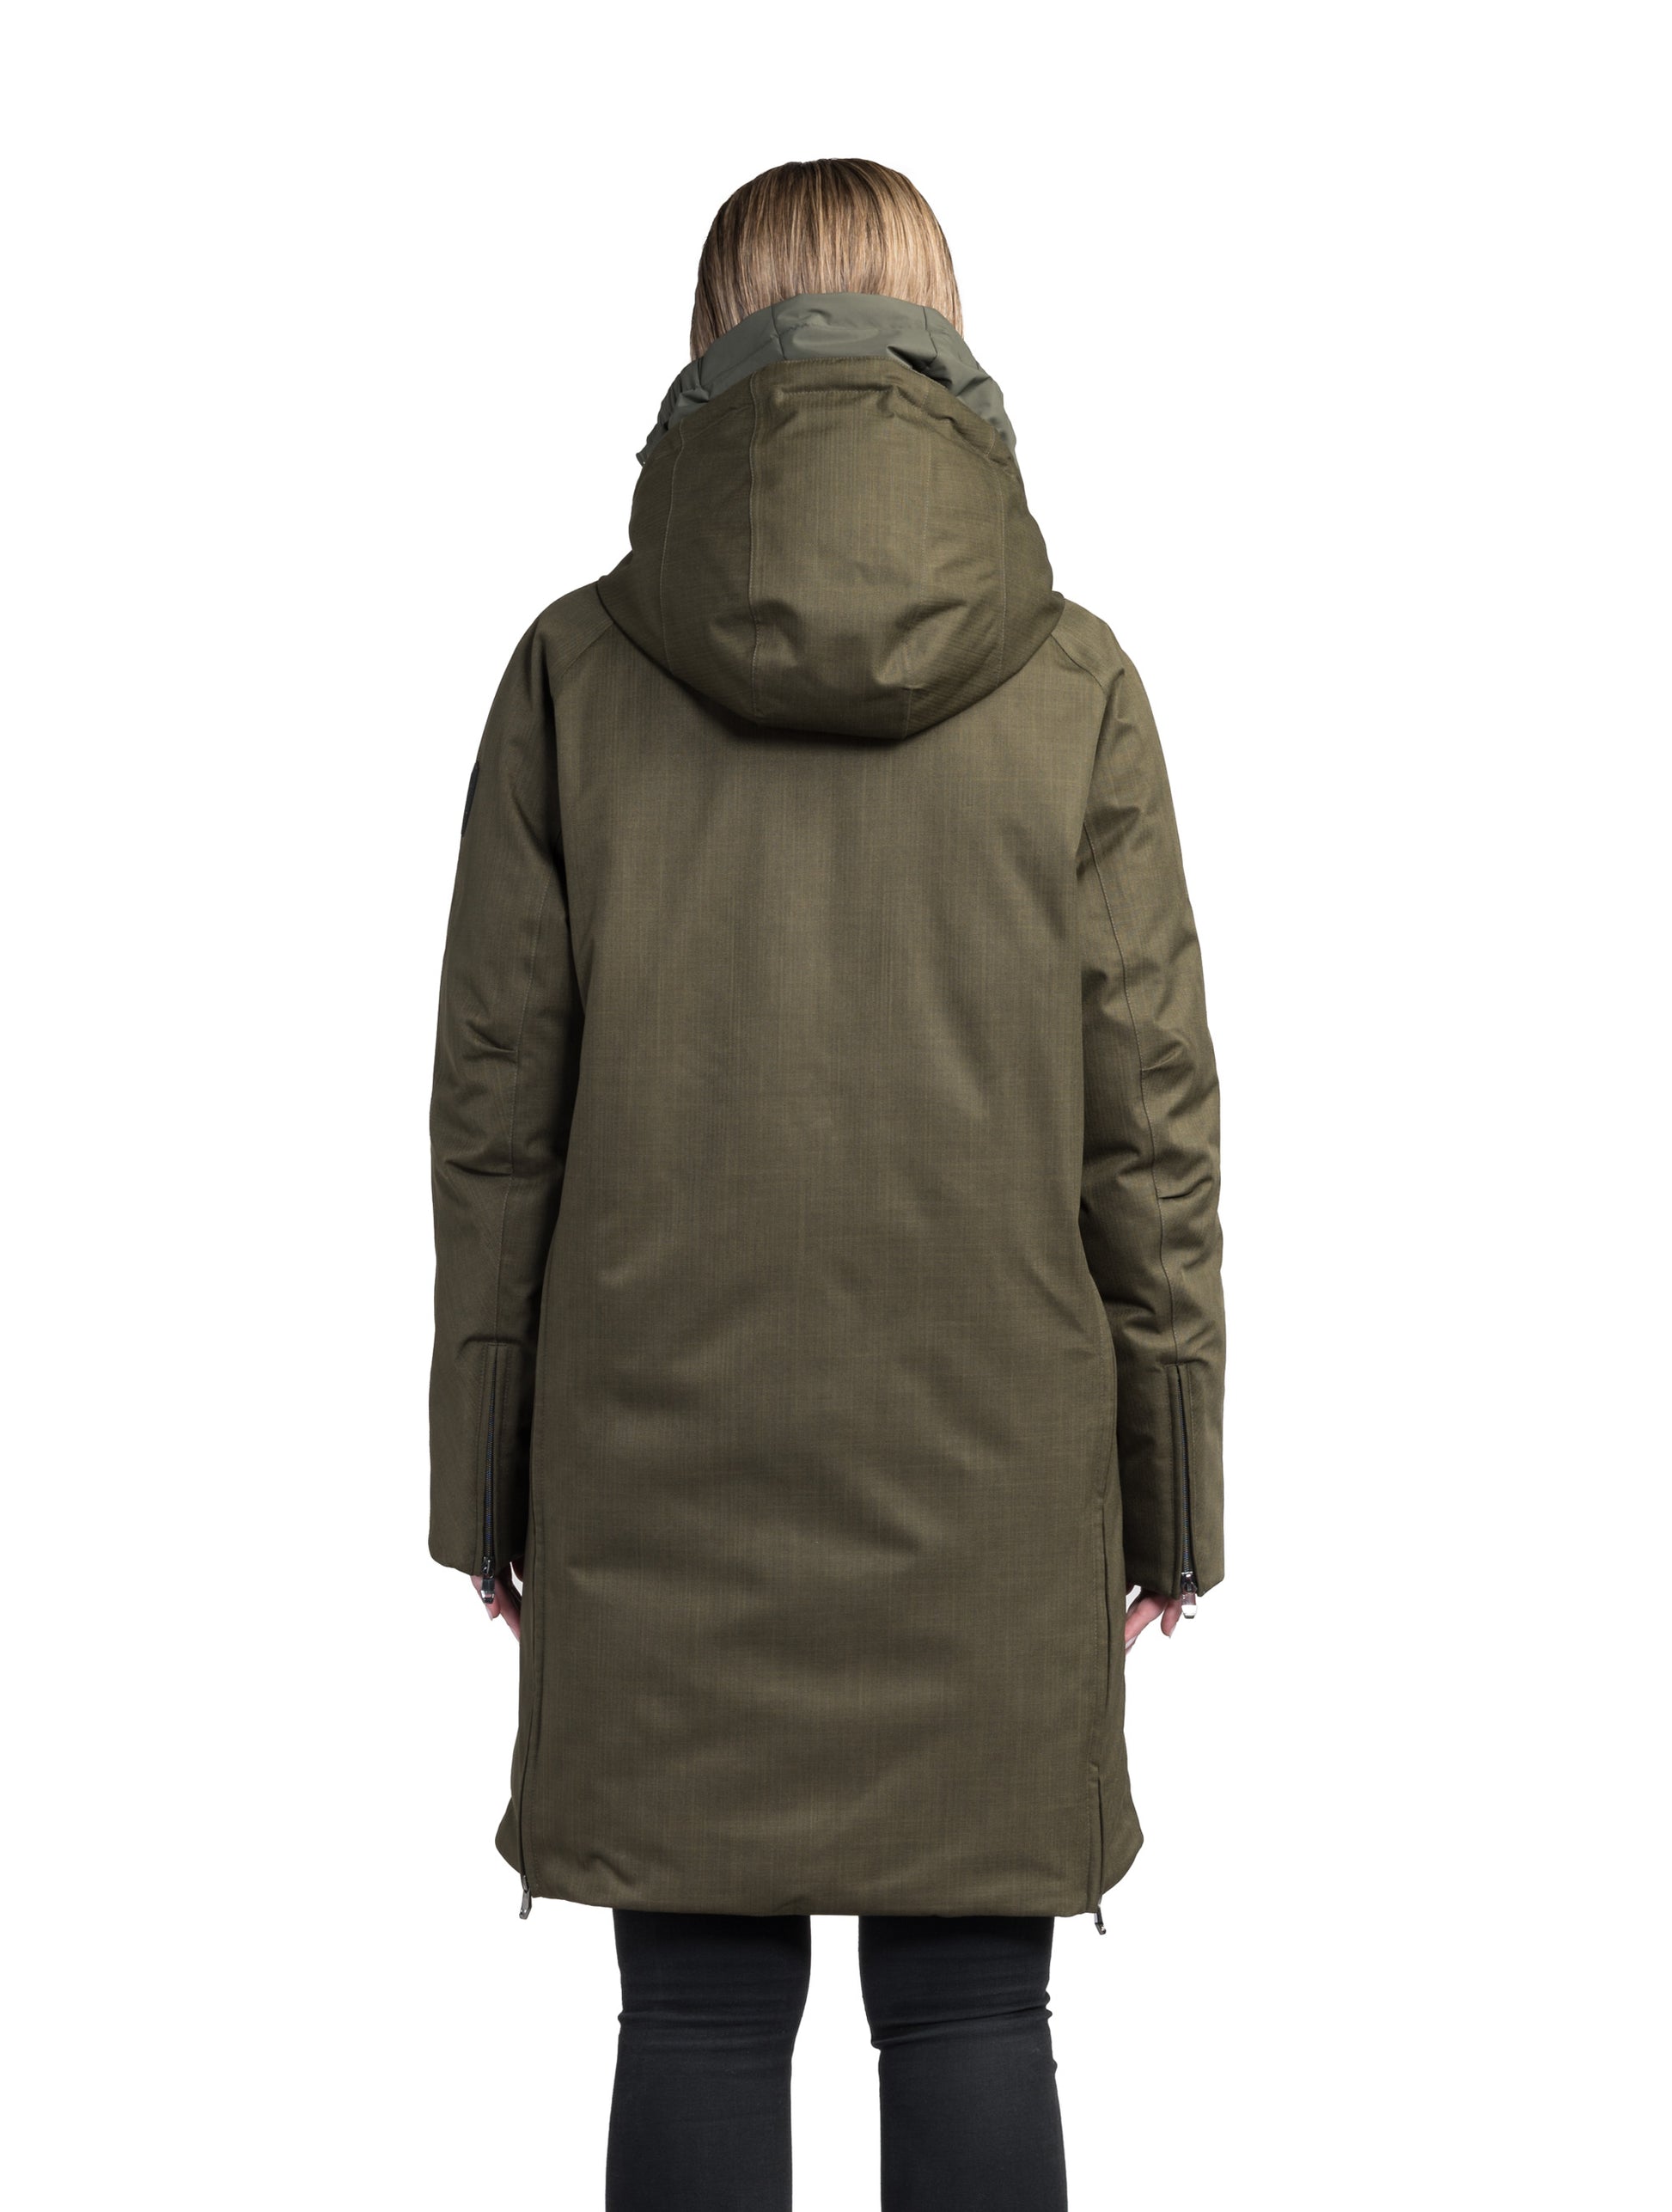 Dory Women's Tailored Back Zip Parka in knee length, premium Crosshatch fabrication, Premium Canadian White Duck Down insulation, non-removable down-filled hood, removable interior hood, centre front two-way zipper with wind flap, vertical zipper detailing along back, in Fatigue